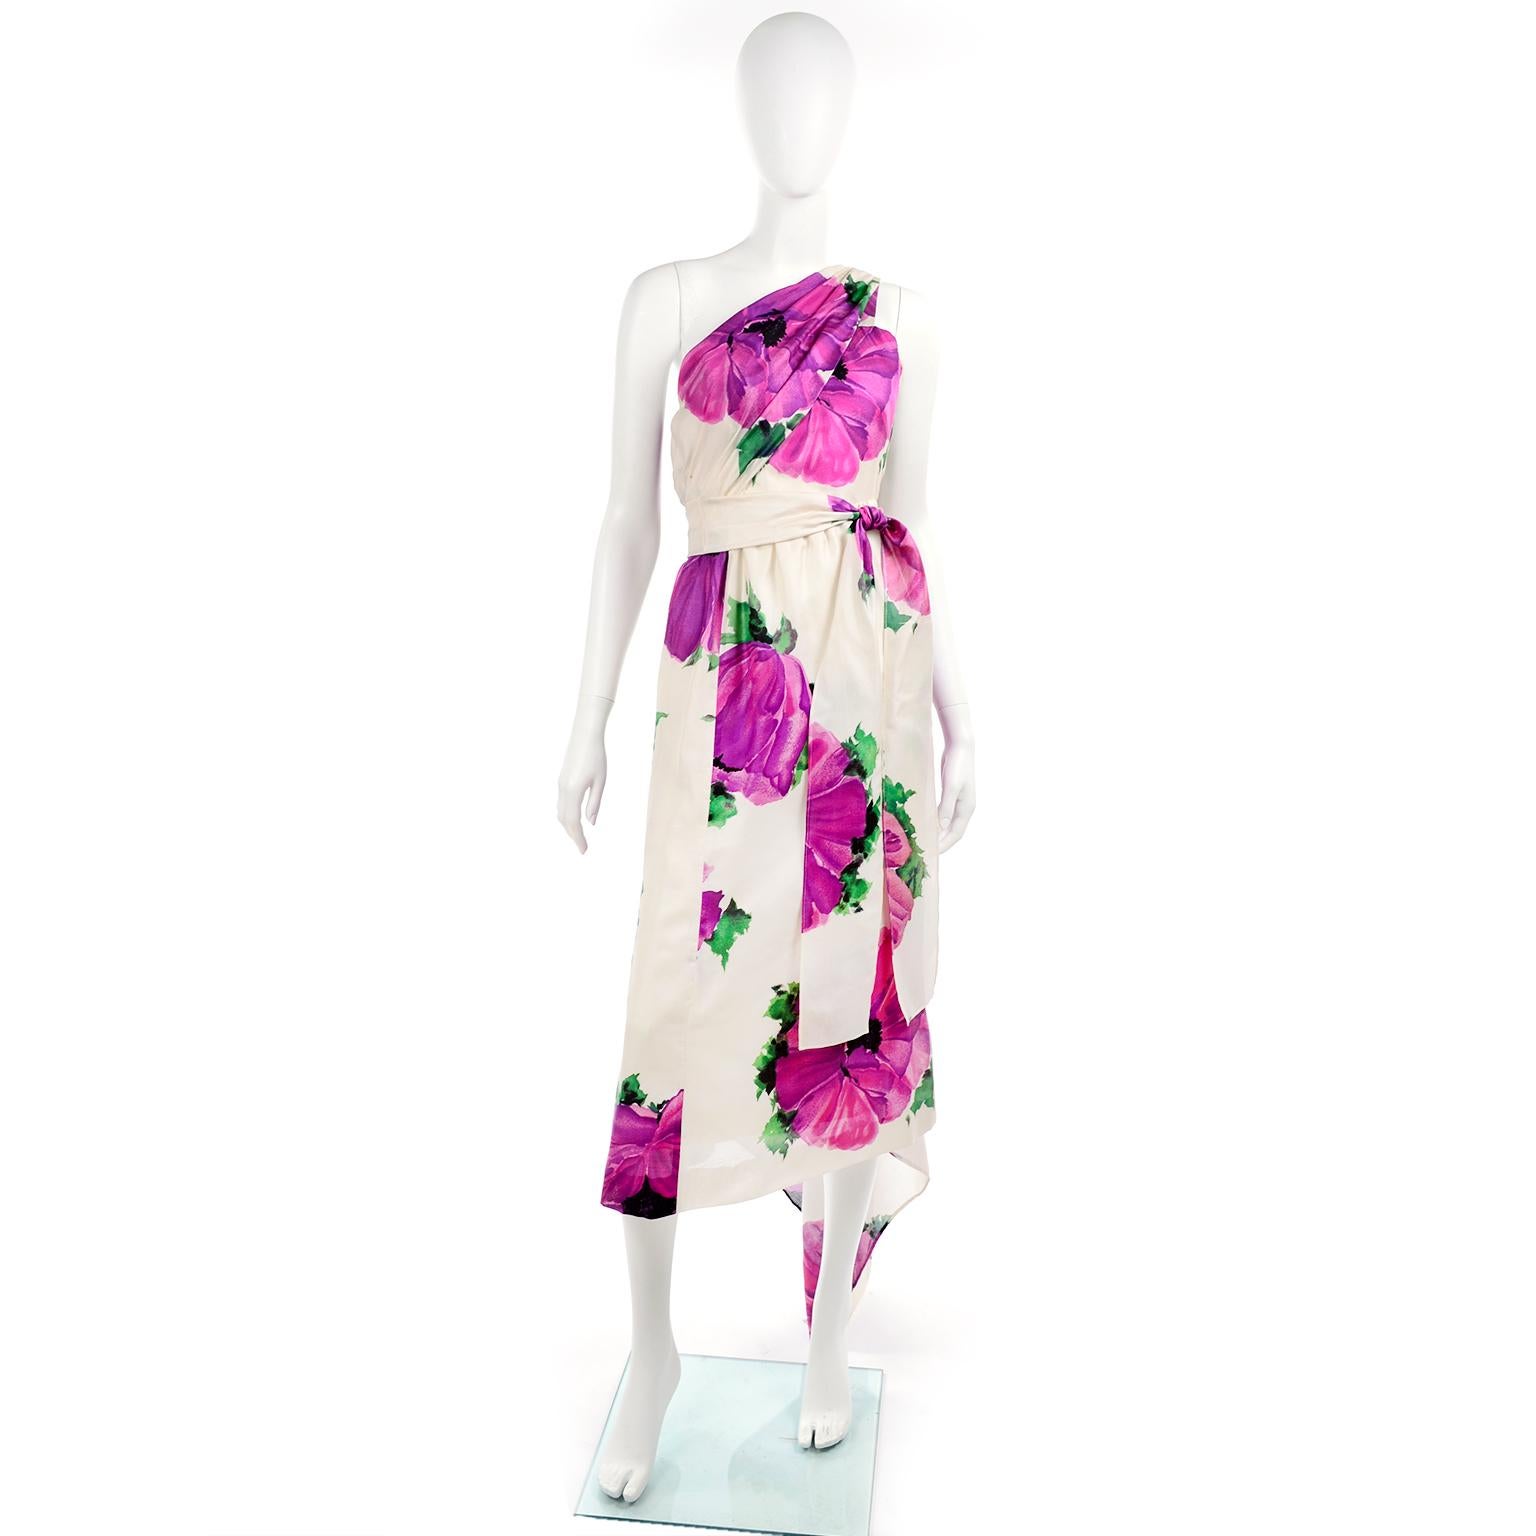 Givenchy Haute Couture Vintage Purple Pink Floral Silk Dress. This is an absolutely gorgeous silk gazar couture dress in an oversized poppy floral print. The dress is missing the Givenchy label but was made for the owner by the gifted Givenchy